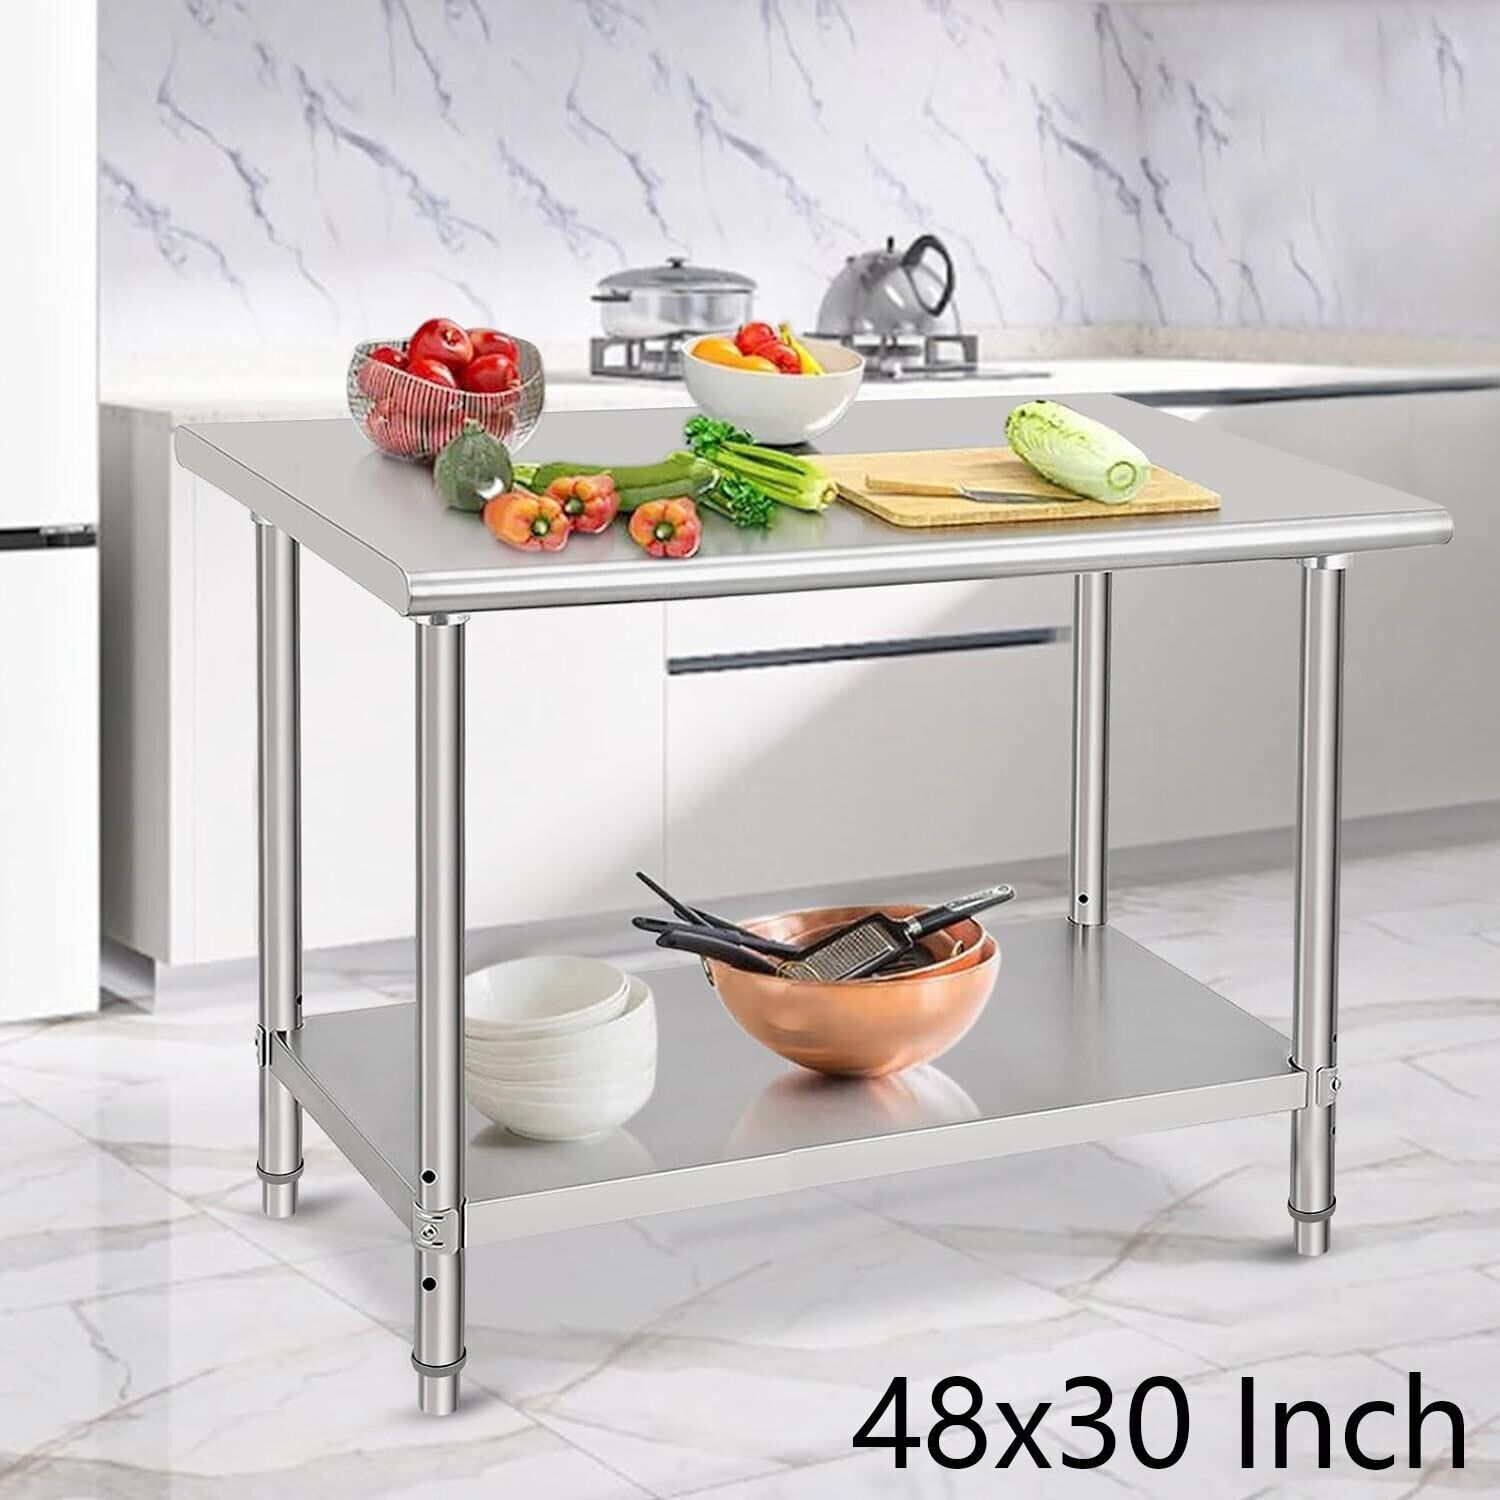 Food Prep Stainless Steel Table 48x30 Inch Commercial Workstation w/ Undershelf